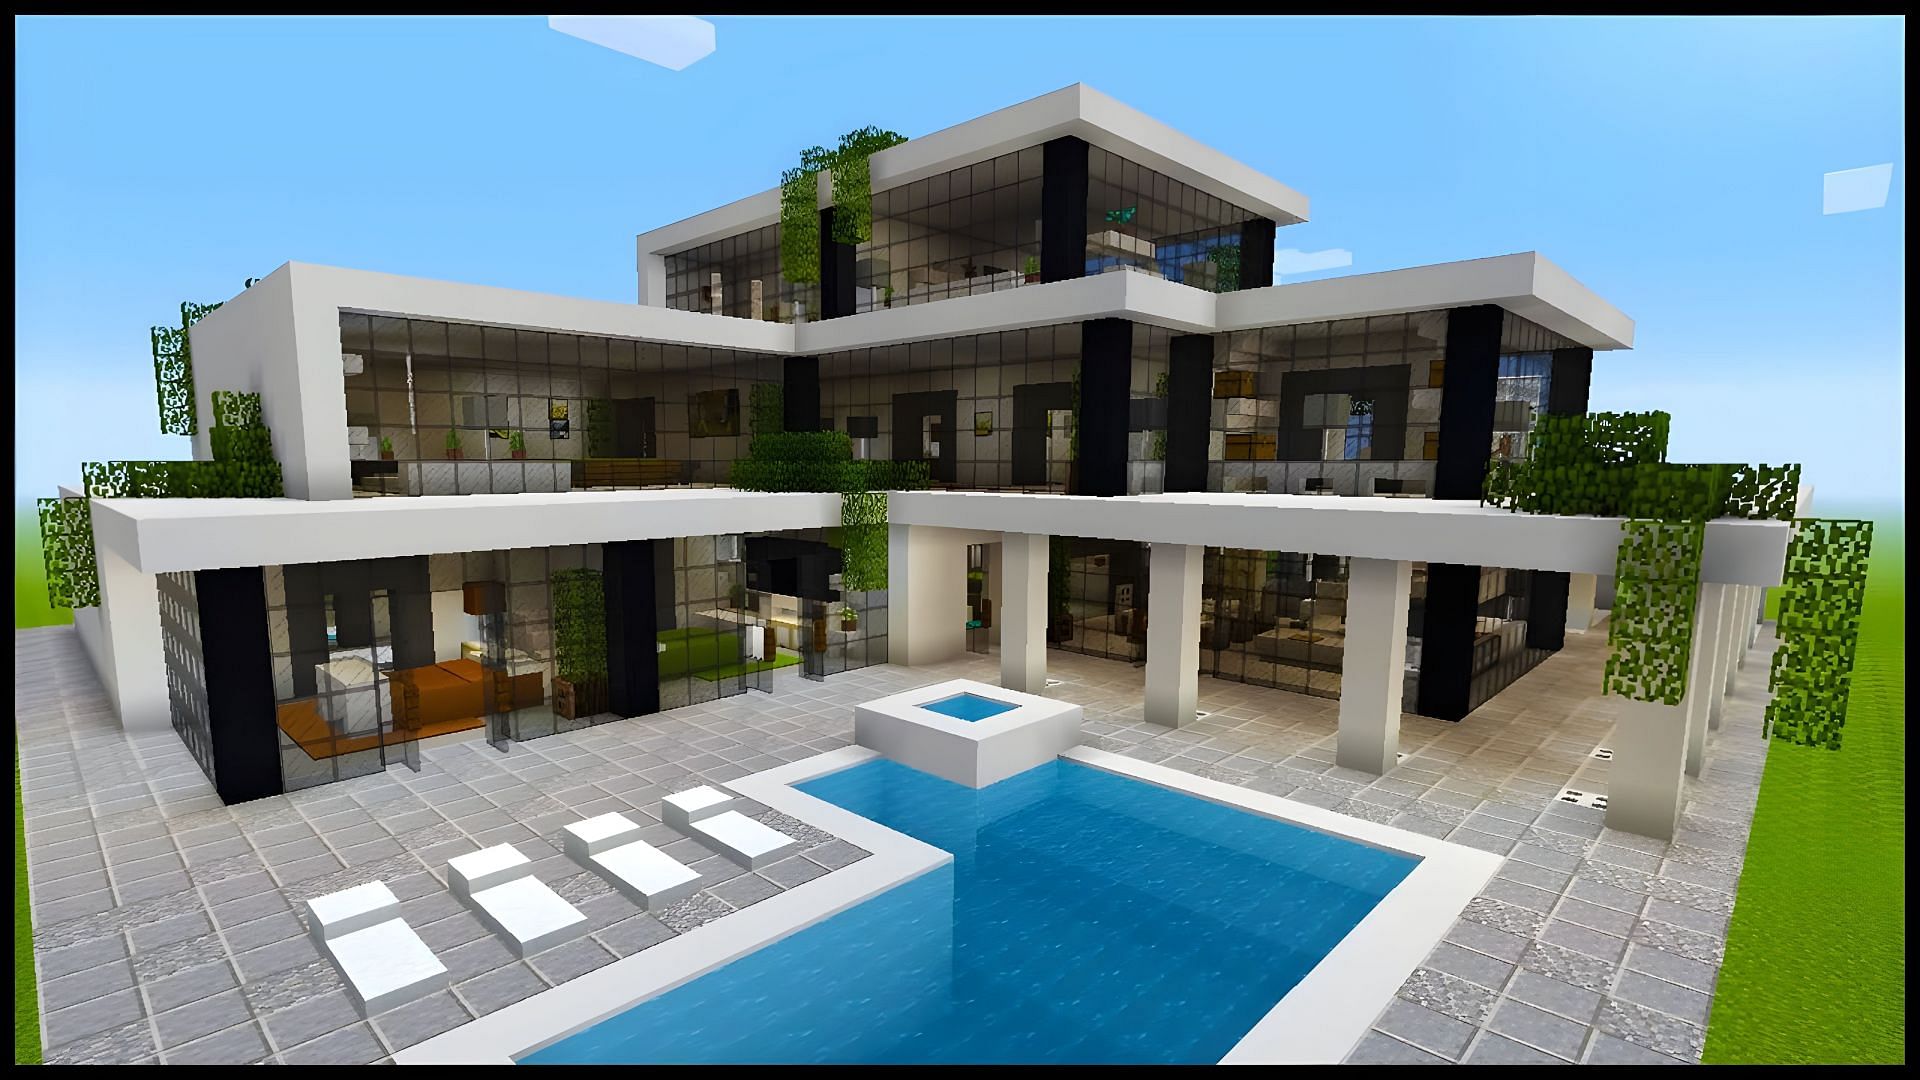 Modern minecraft house with swimming pool